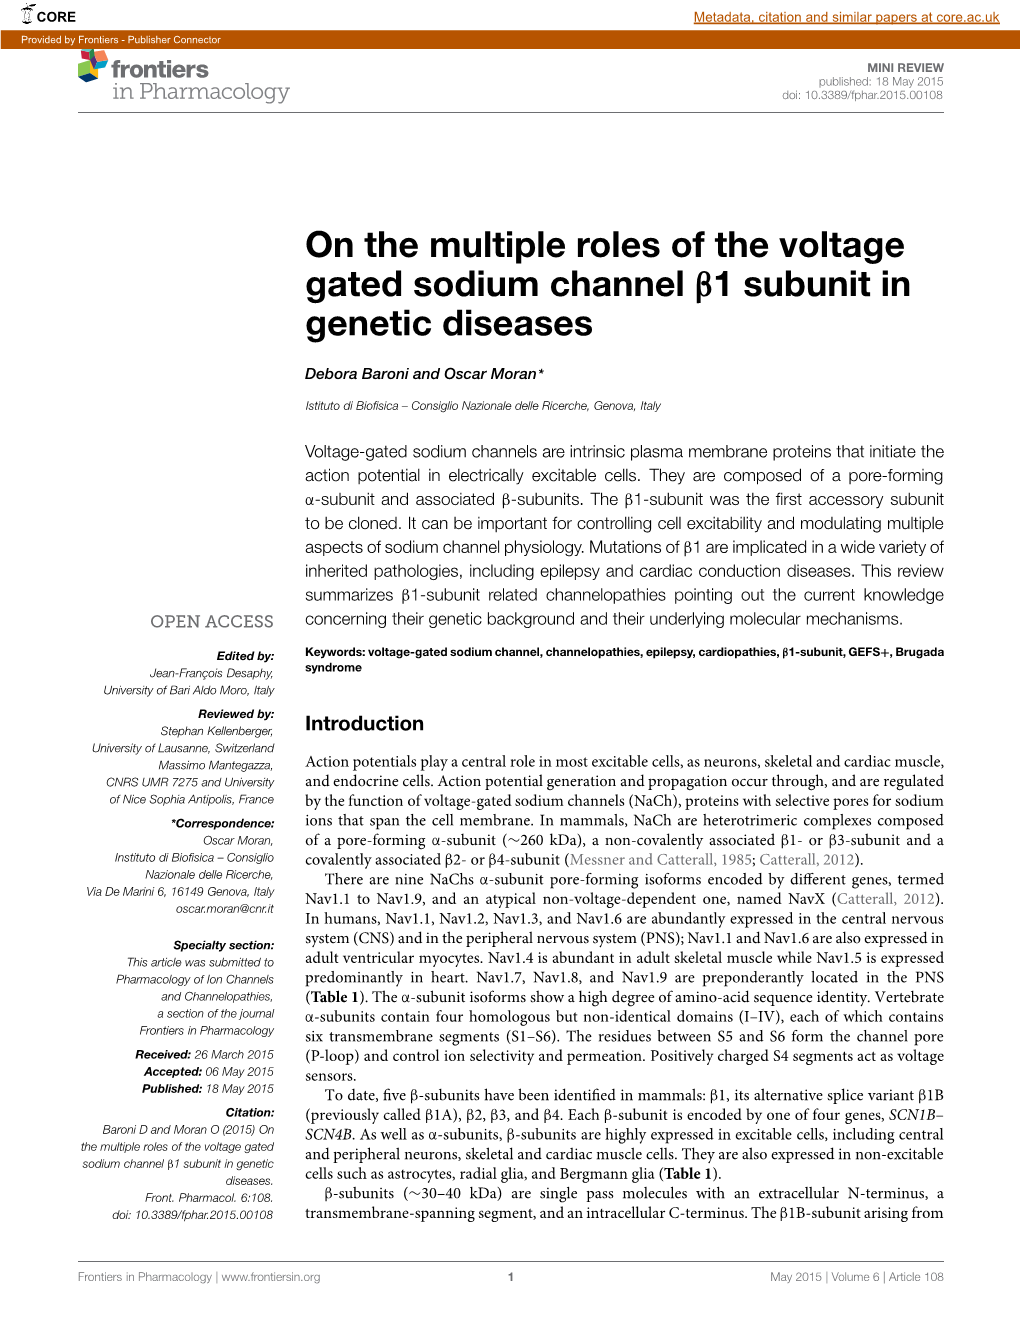 On the Multiple Roles of the Voltage Gated Sodium Channel Β1 Subunit in Genetic Diseases